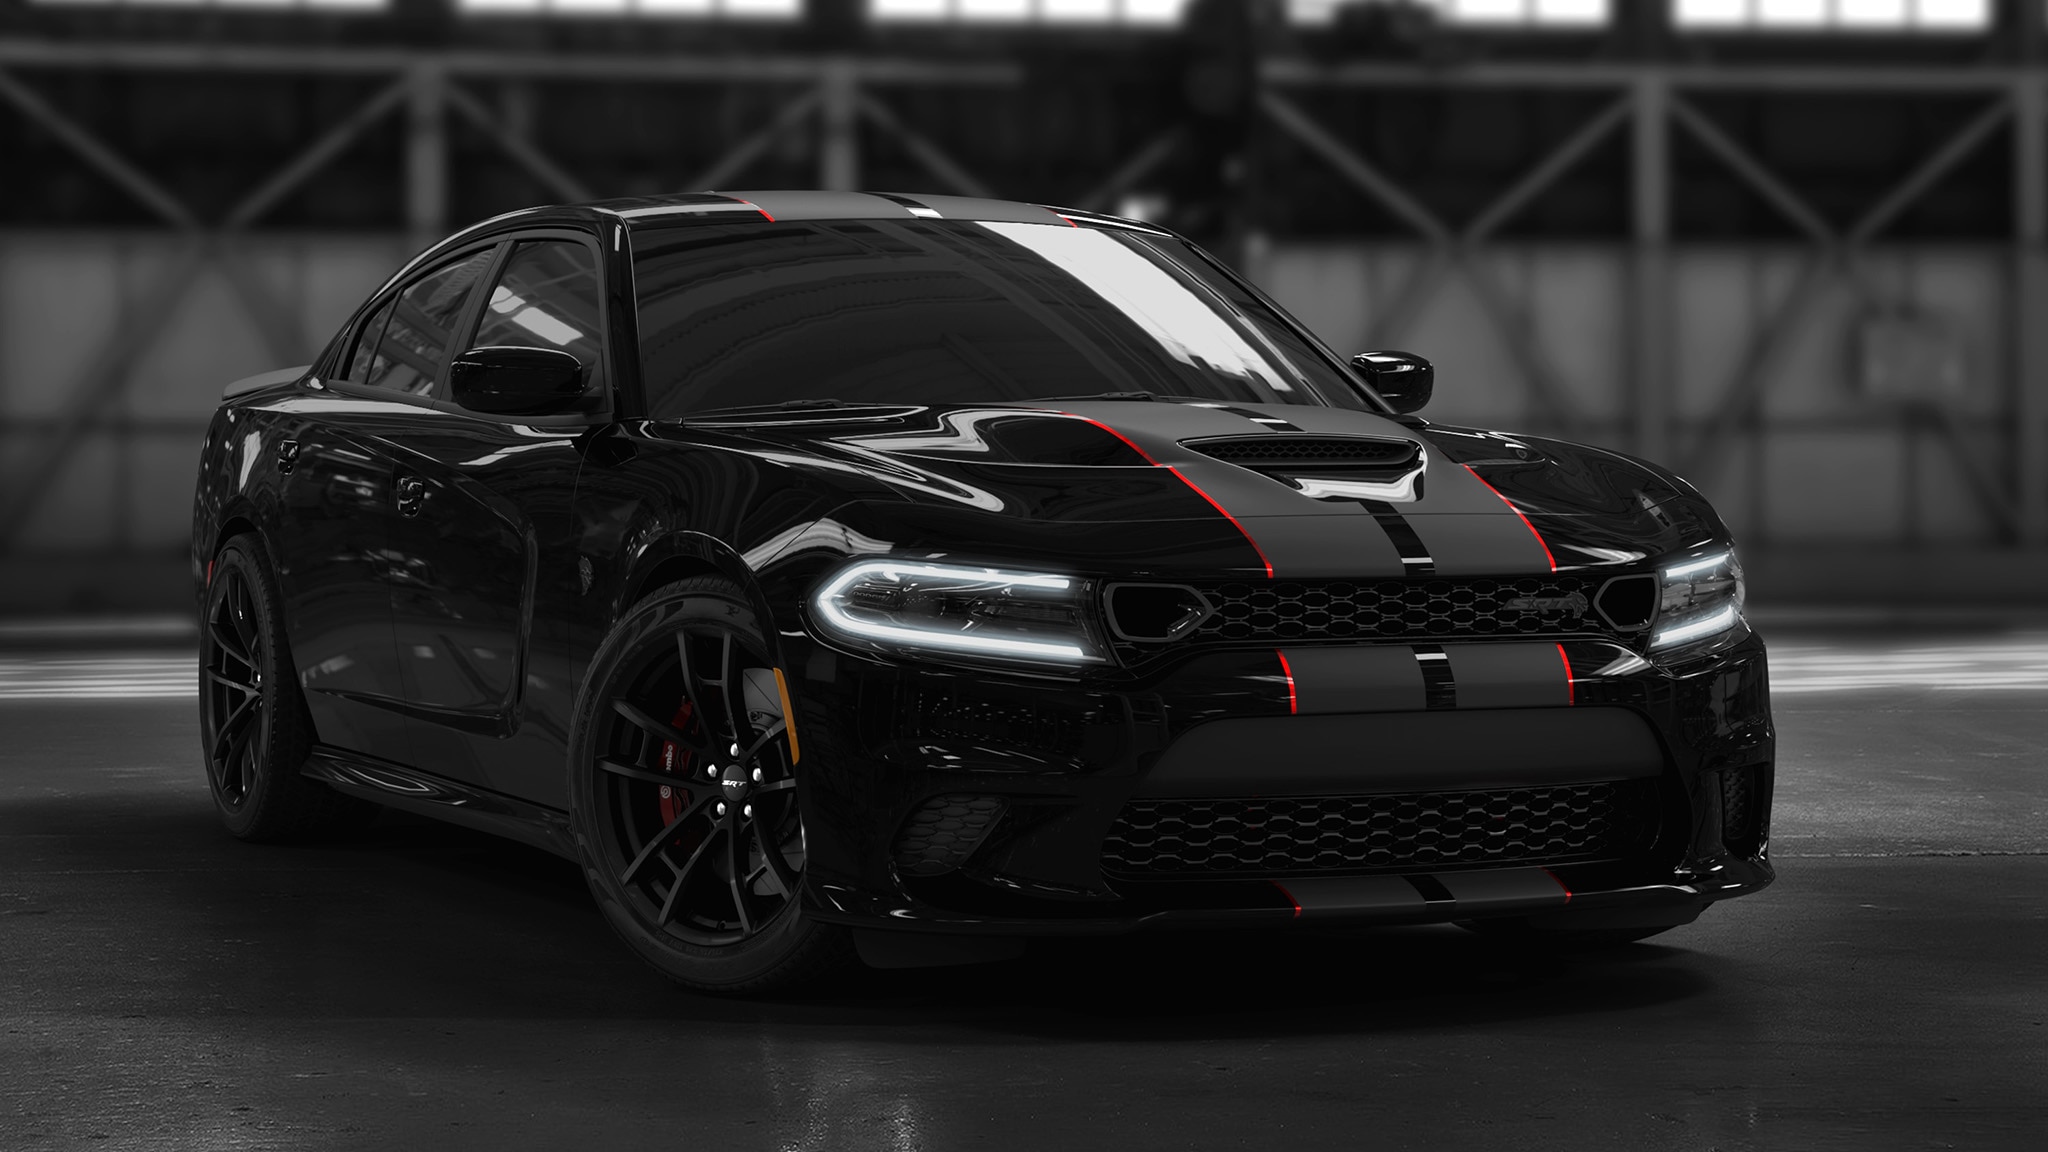 Black Dodge Charger Wallpapers   Top Free Black Dodge Charger